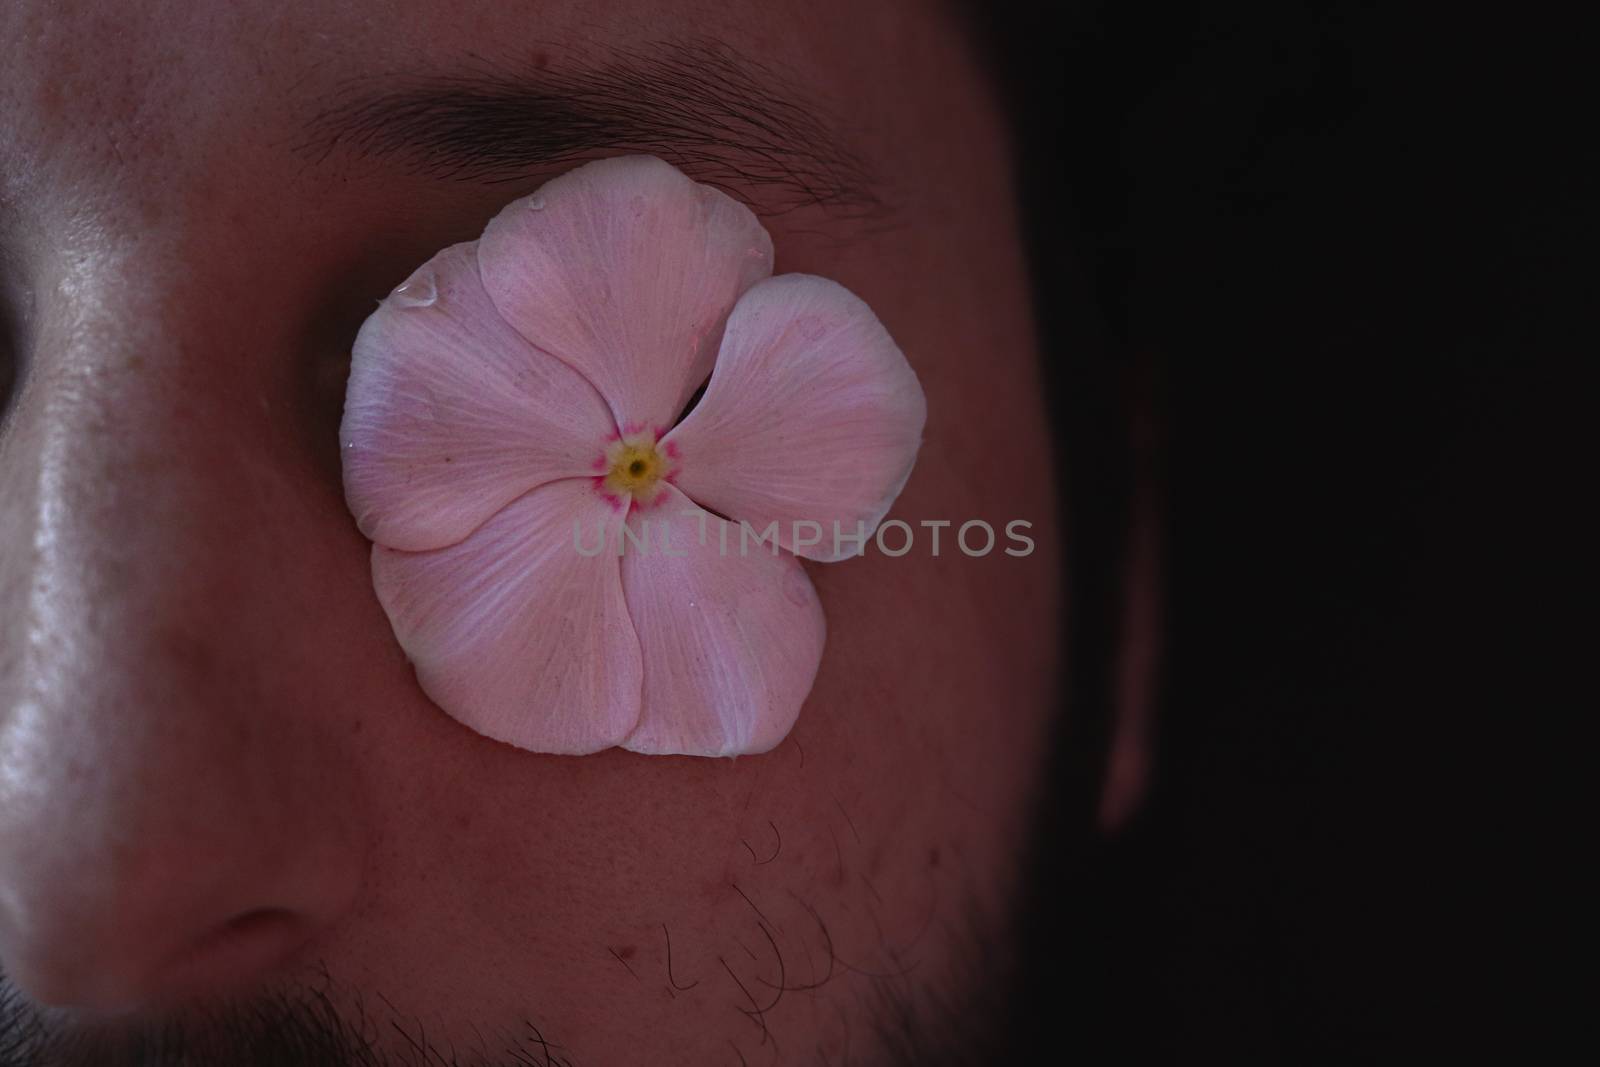 Conceptual Photo of a man with a flower over his Eye by Sonnet15